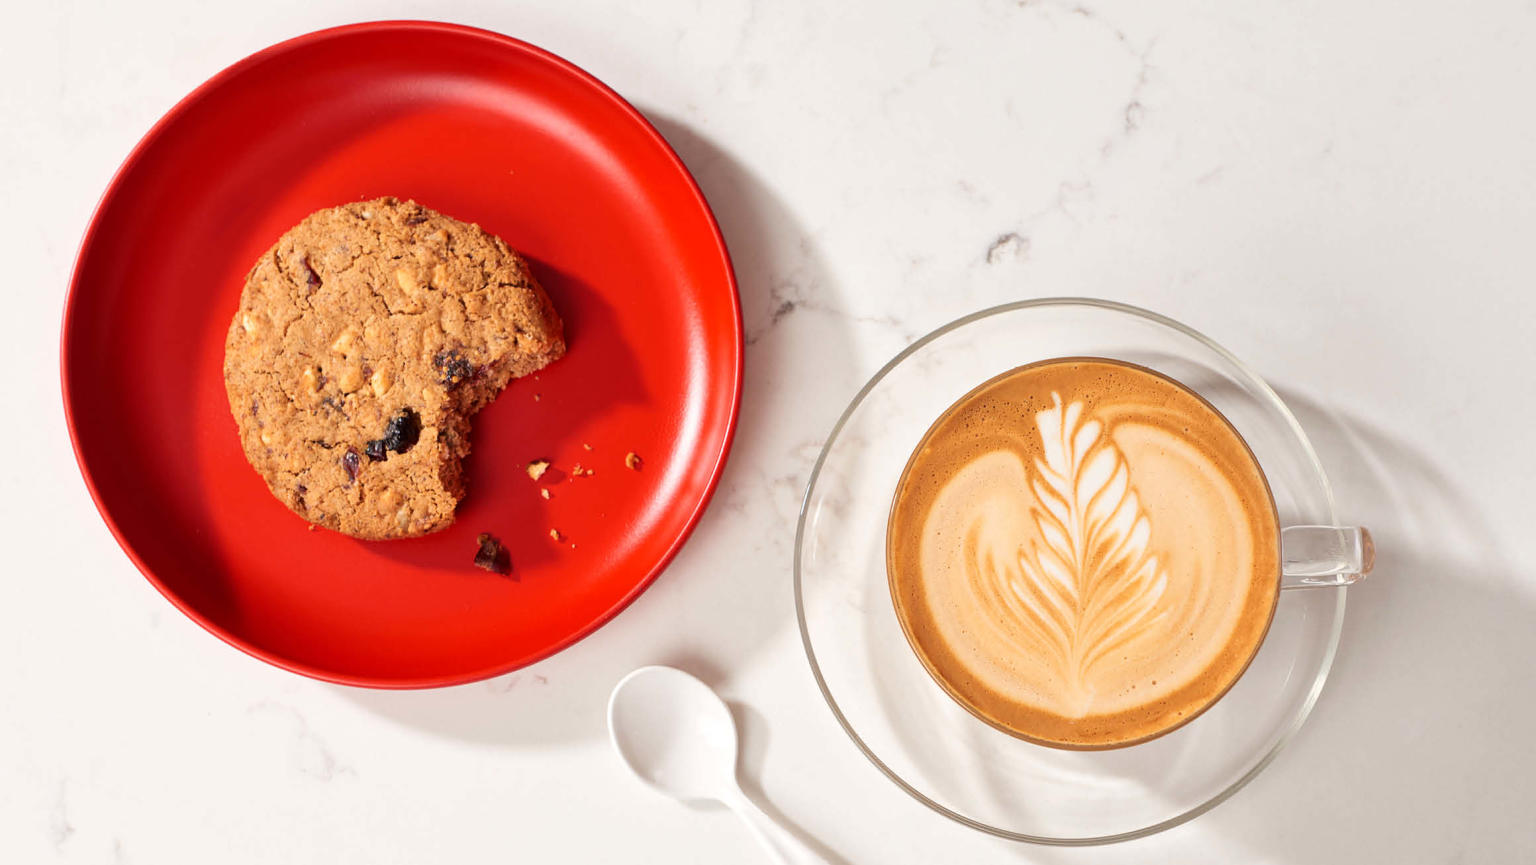 A beautifully crafted cup of coffee with intricate latte art, accompanied by a red plate showcasing a delectable cookie with a bite missing.